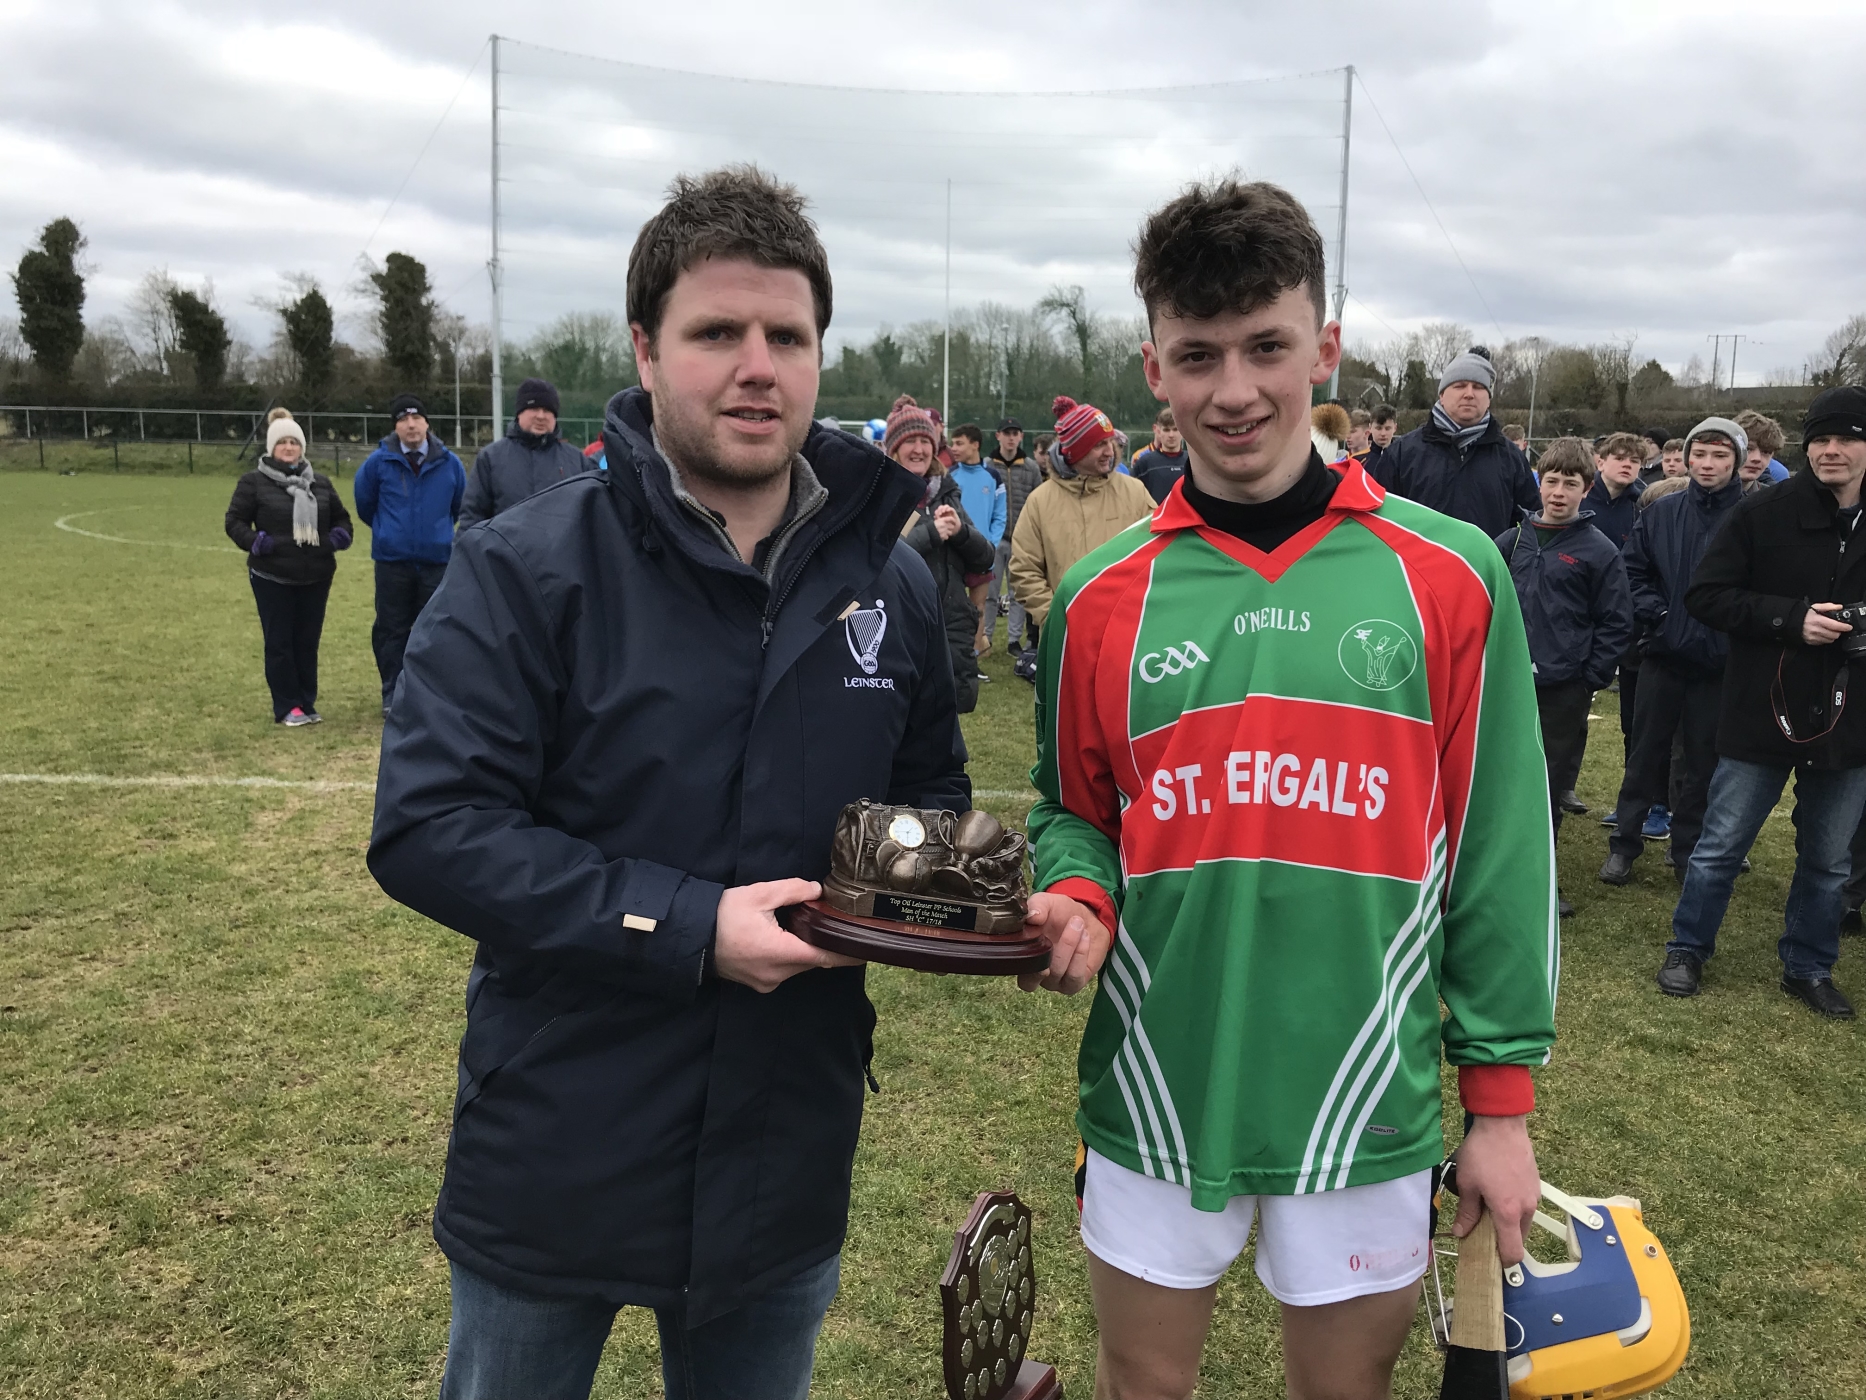 Man of the match Kevin Mulhall collects his award from Leinster GAA's Tadhg Doran